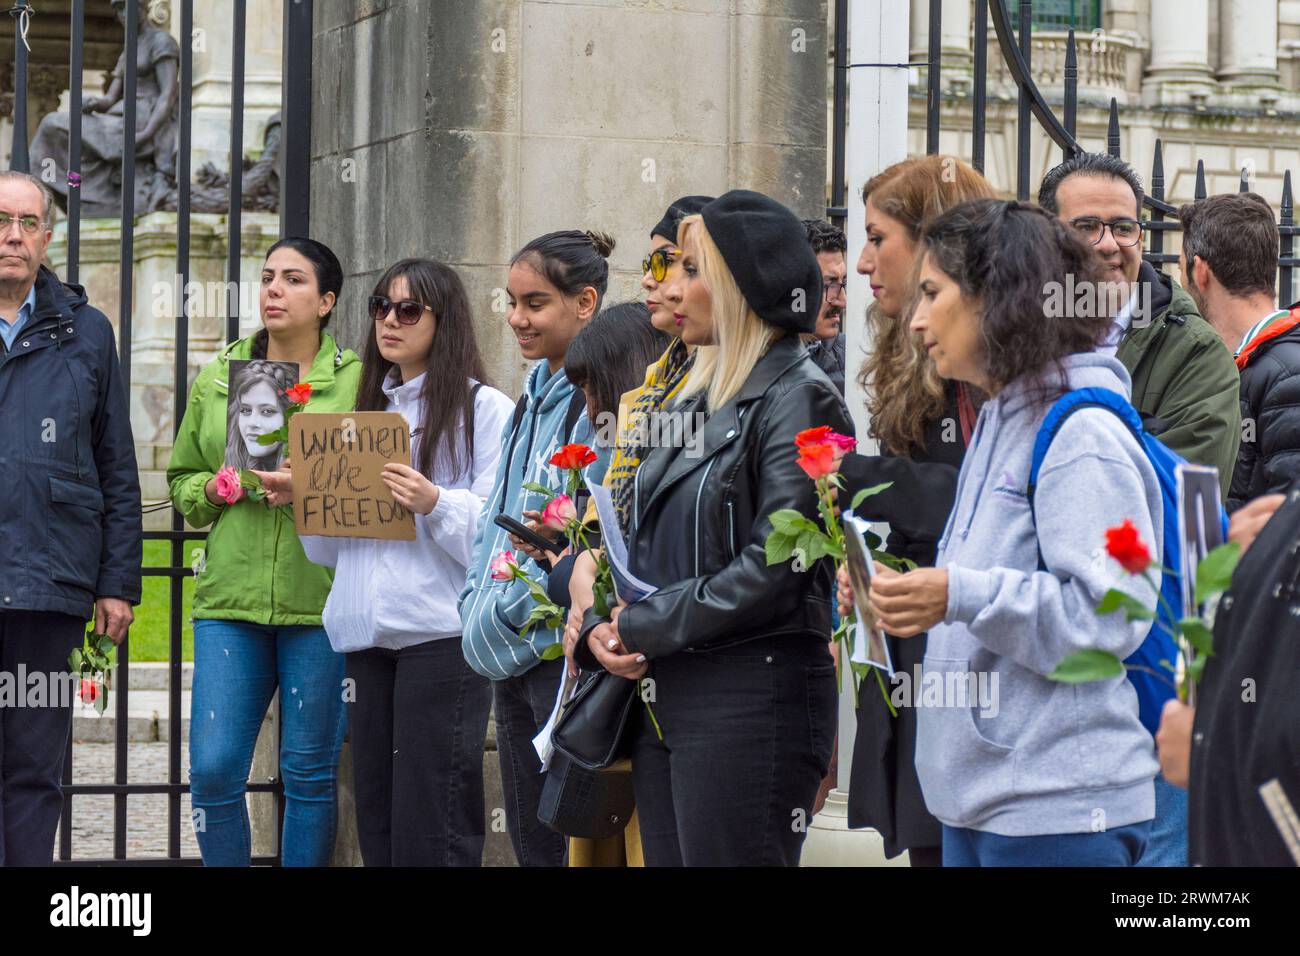 Vigil on the anniversary of Mahsa Amini, the Kurdish woman who died in police custody for not wearing the hijab correctly in Iran. Belfast city hall, Northern Ireland Stock Photo